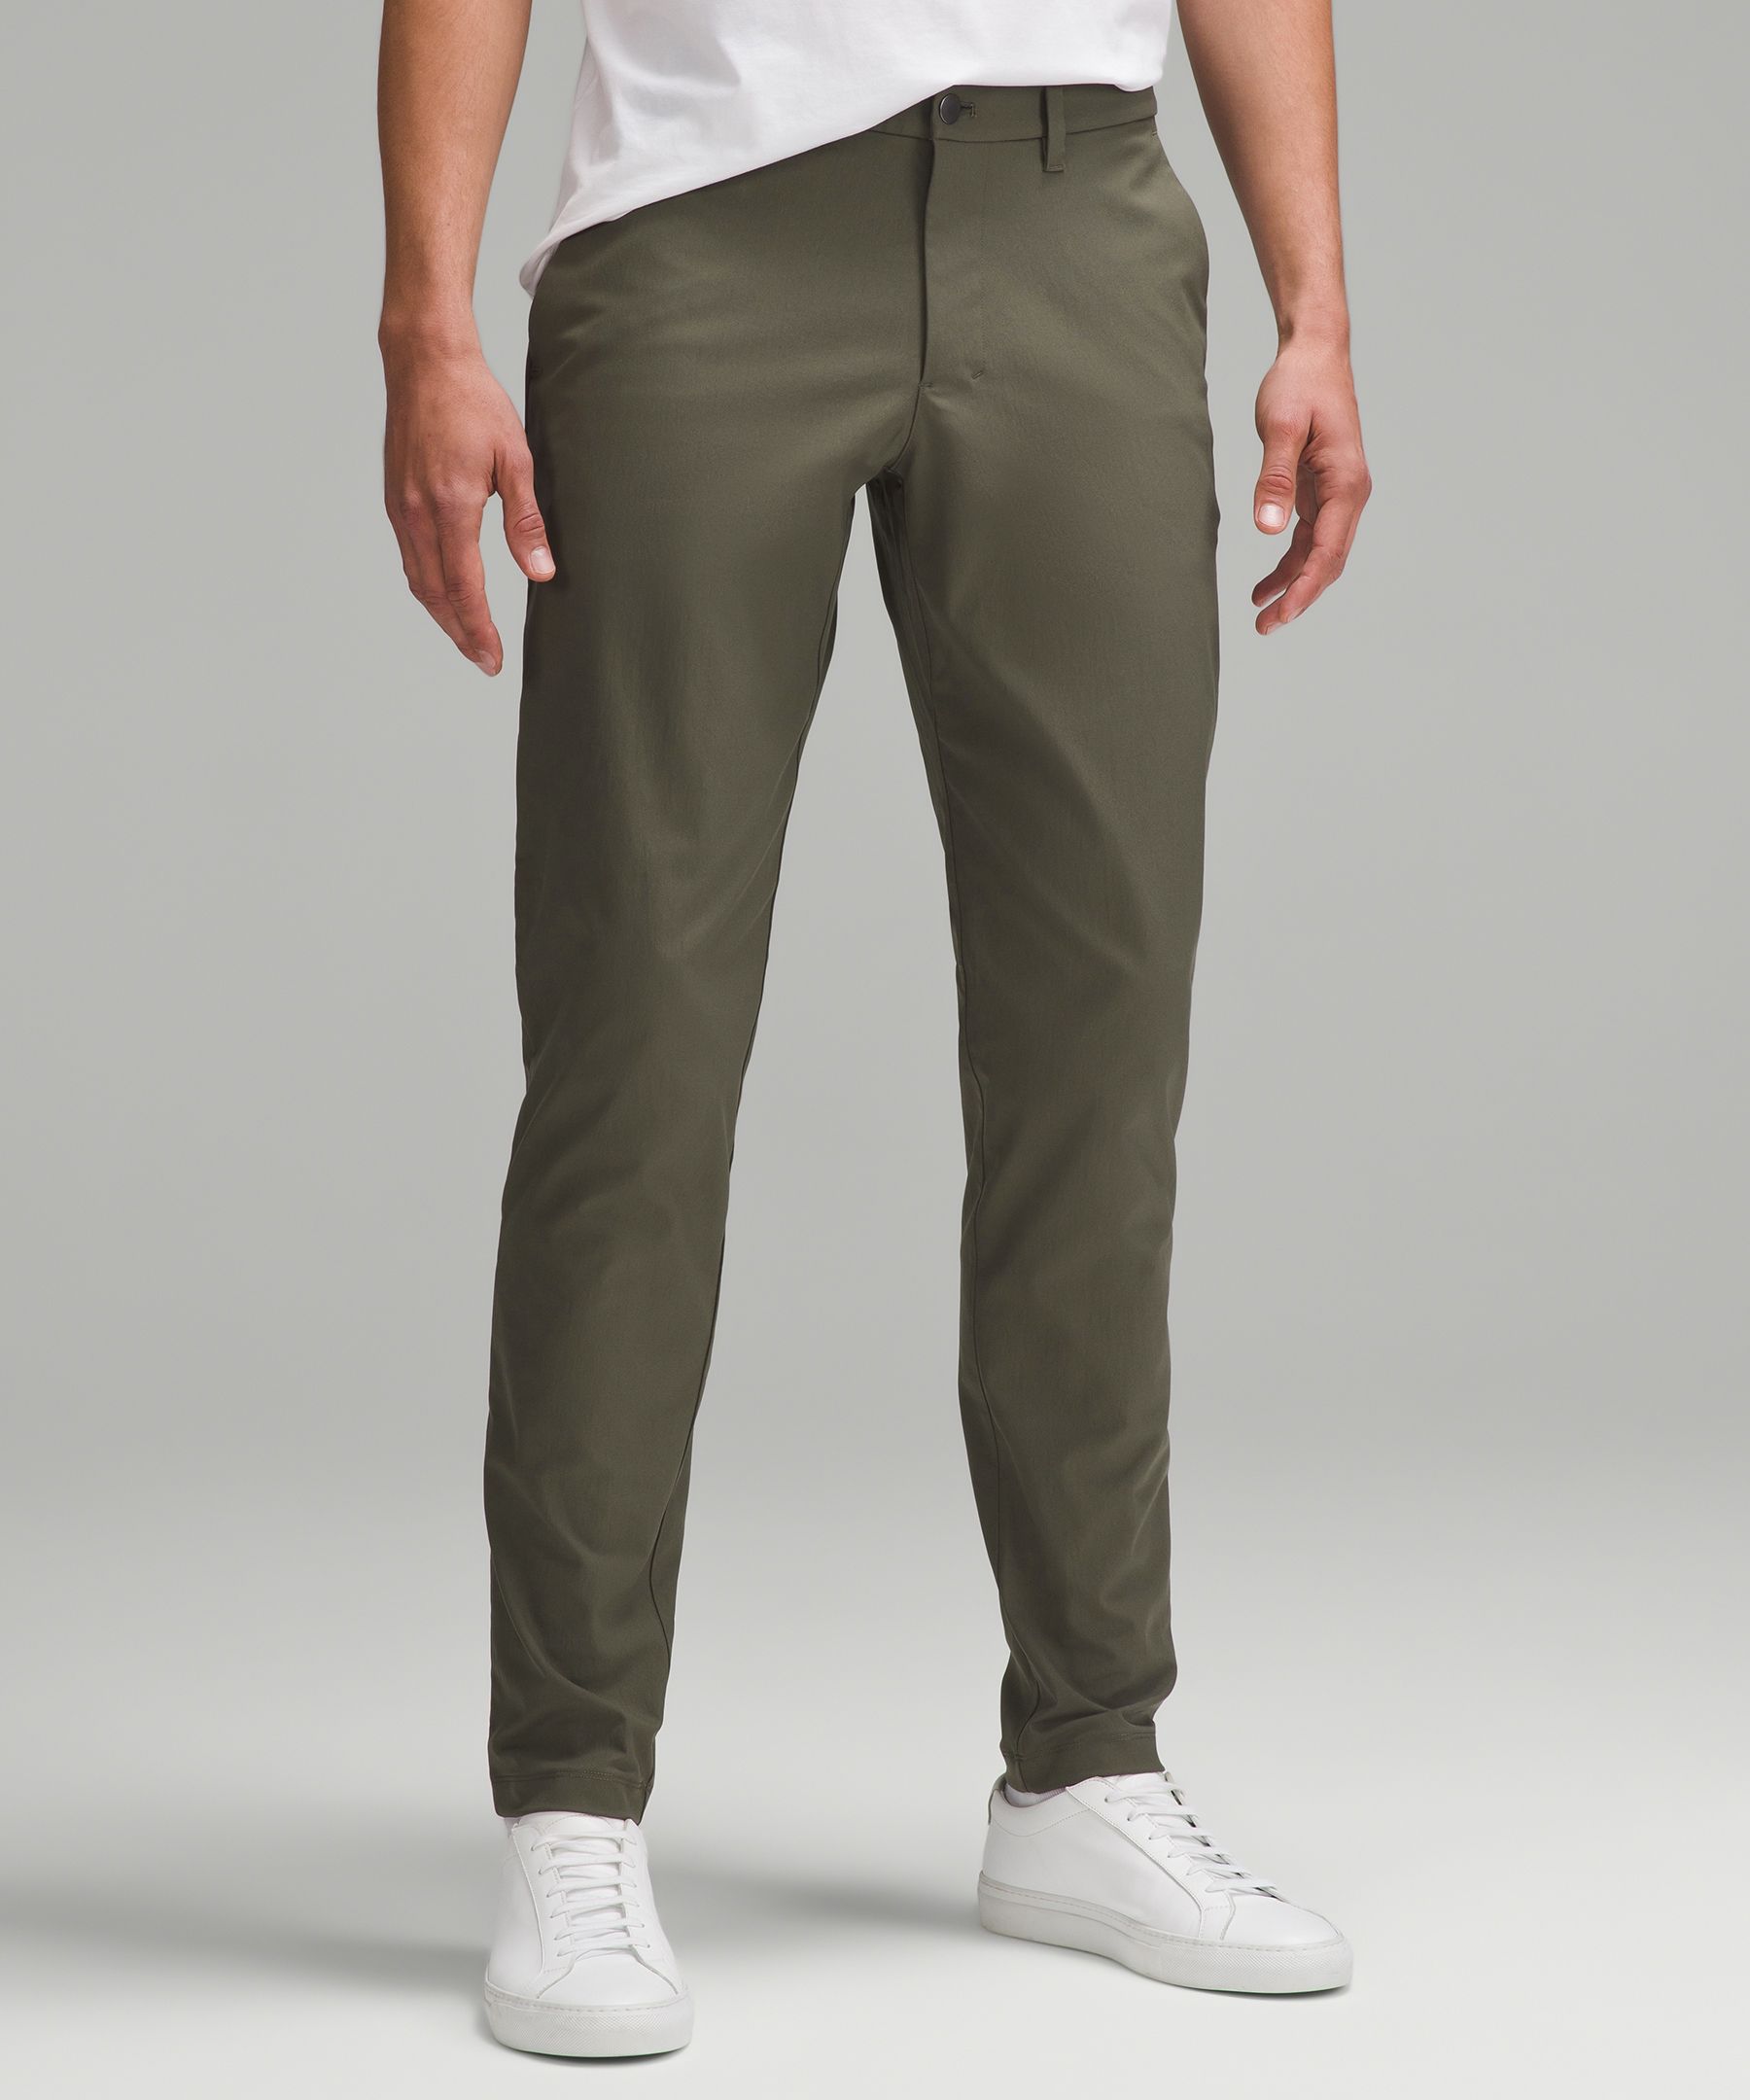 ABC Slim-Fit Trouser 30"L *Smooth Twill | Men's Joggers